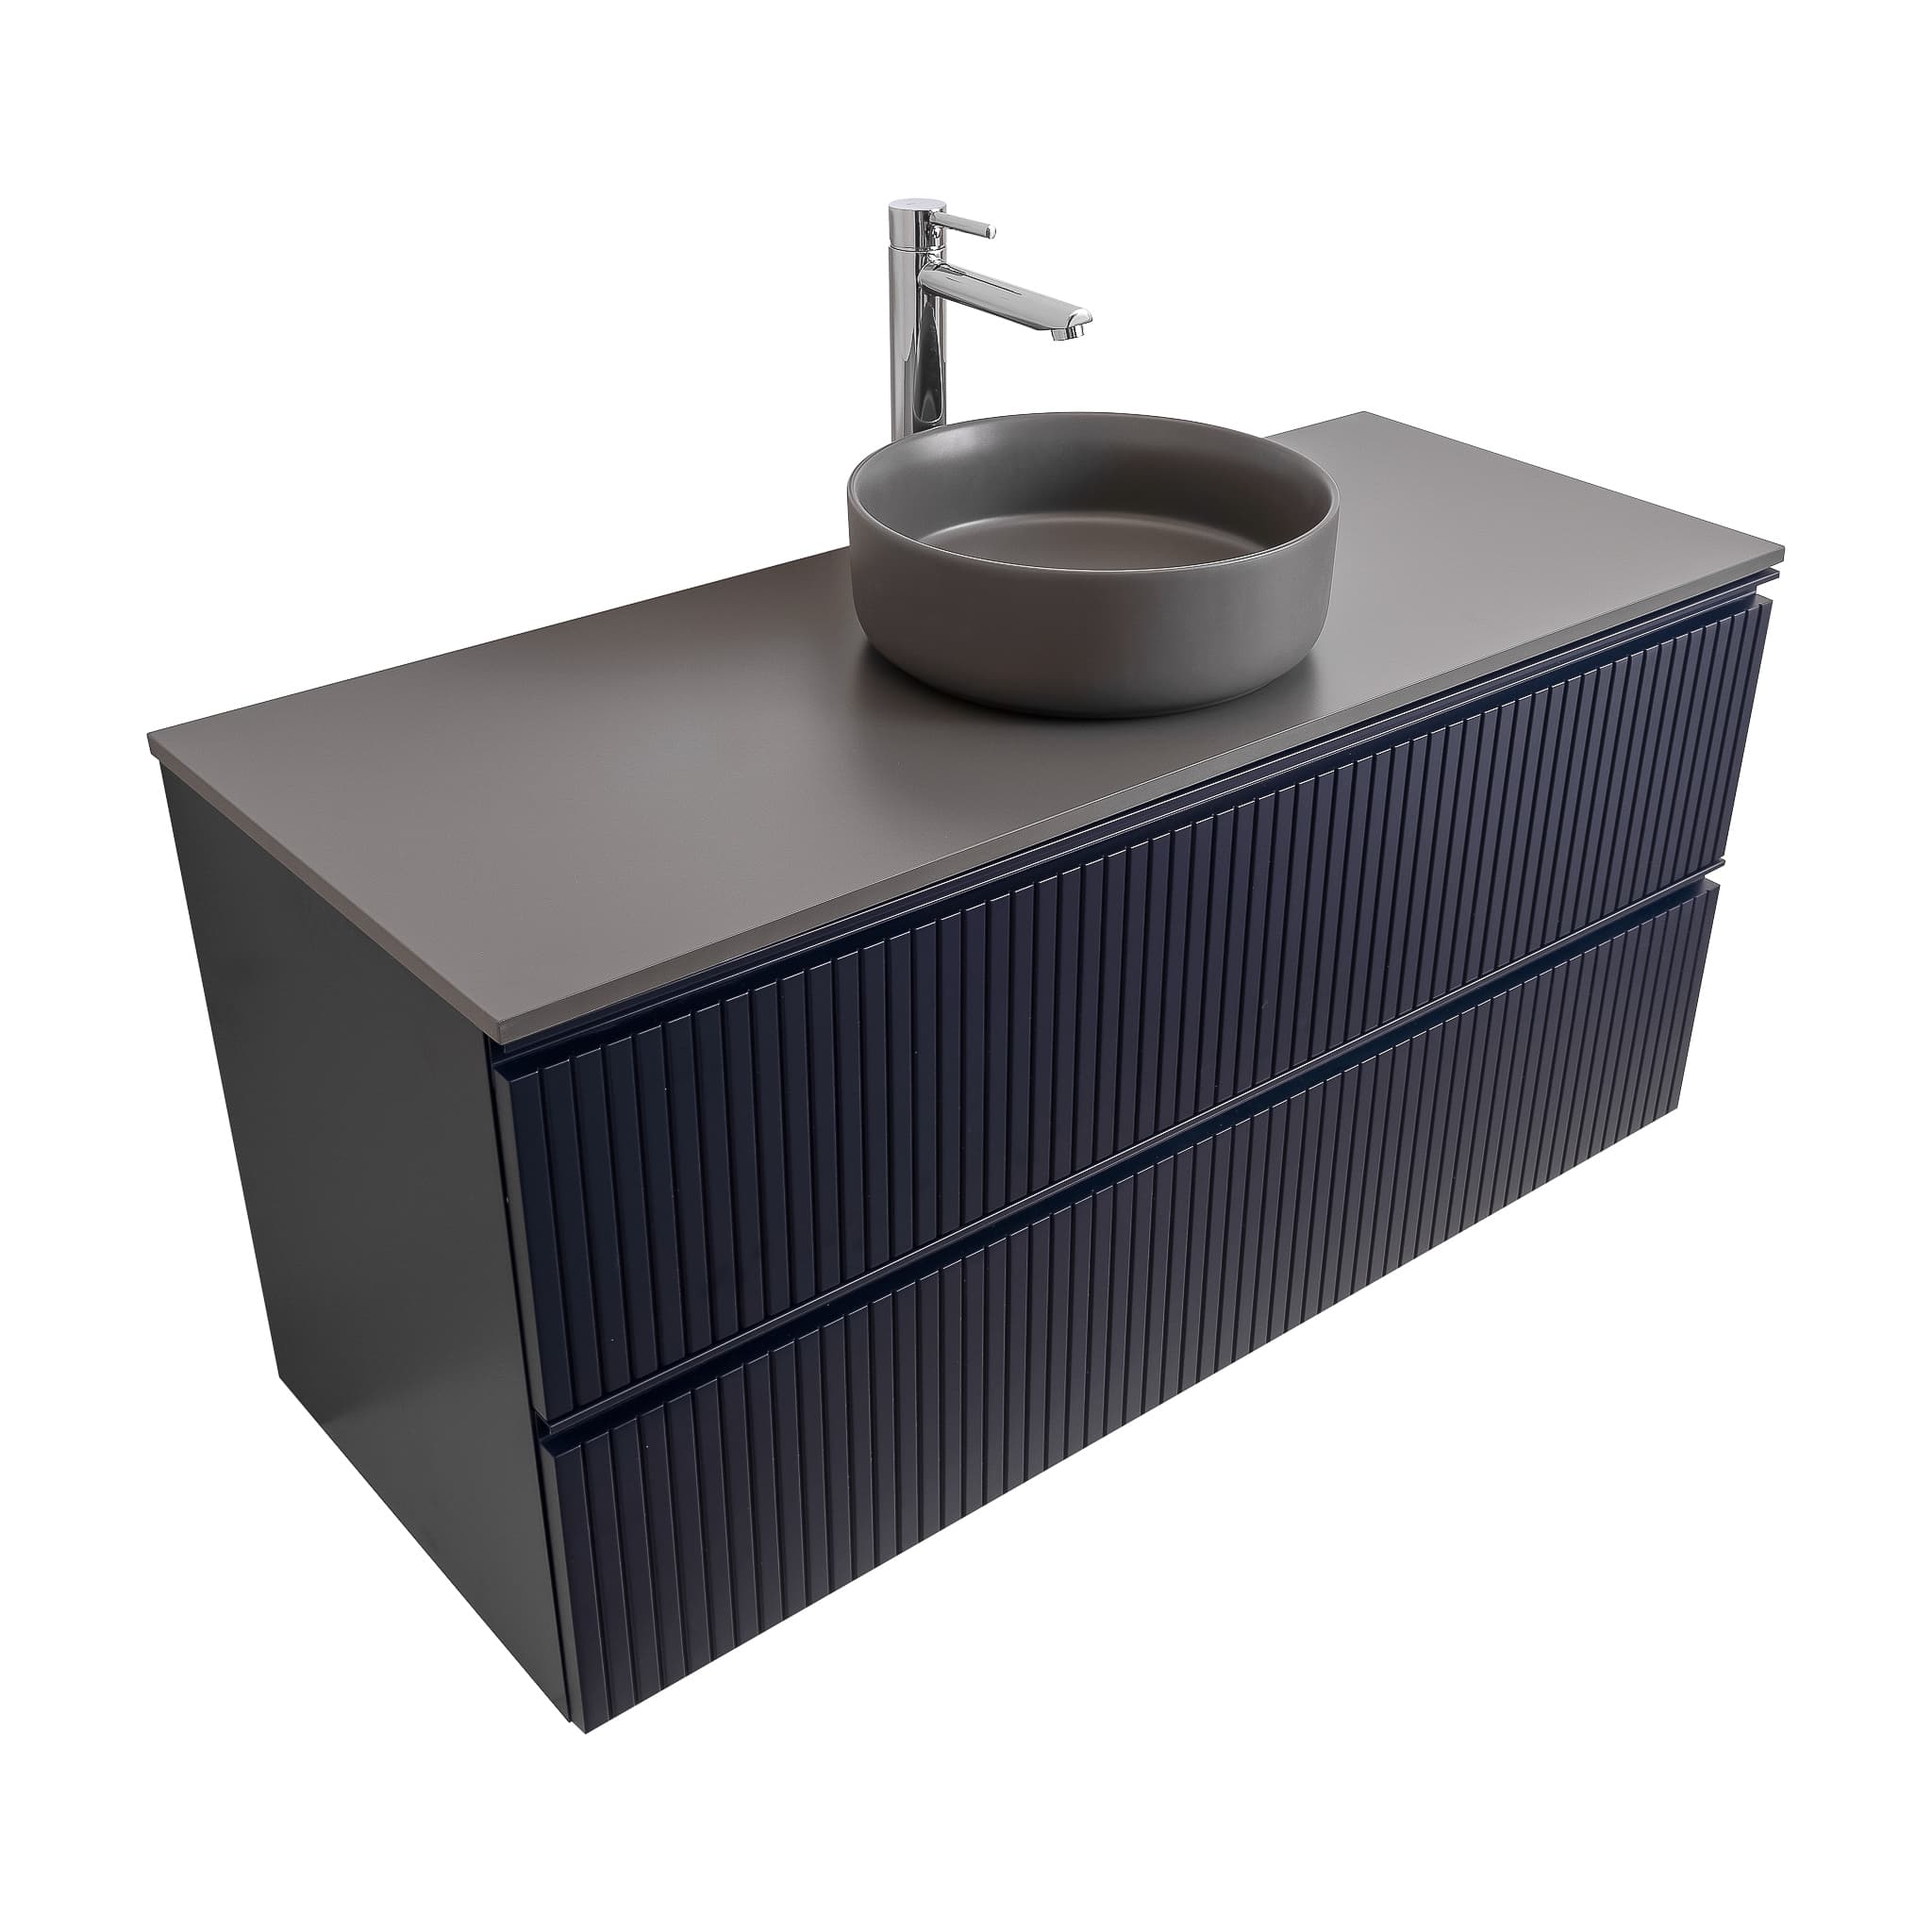 Ares 47.5 Matte Navy Blue Cabinet, Ares Grey Ceniza Top And Ares Grey Ceniza Ceramic Basin, Wall Mounted Modern Vanity Set